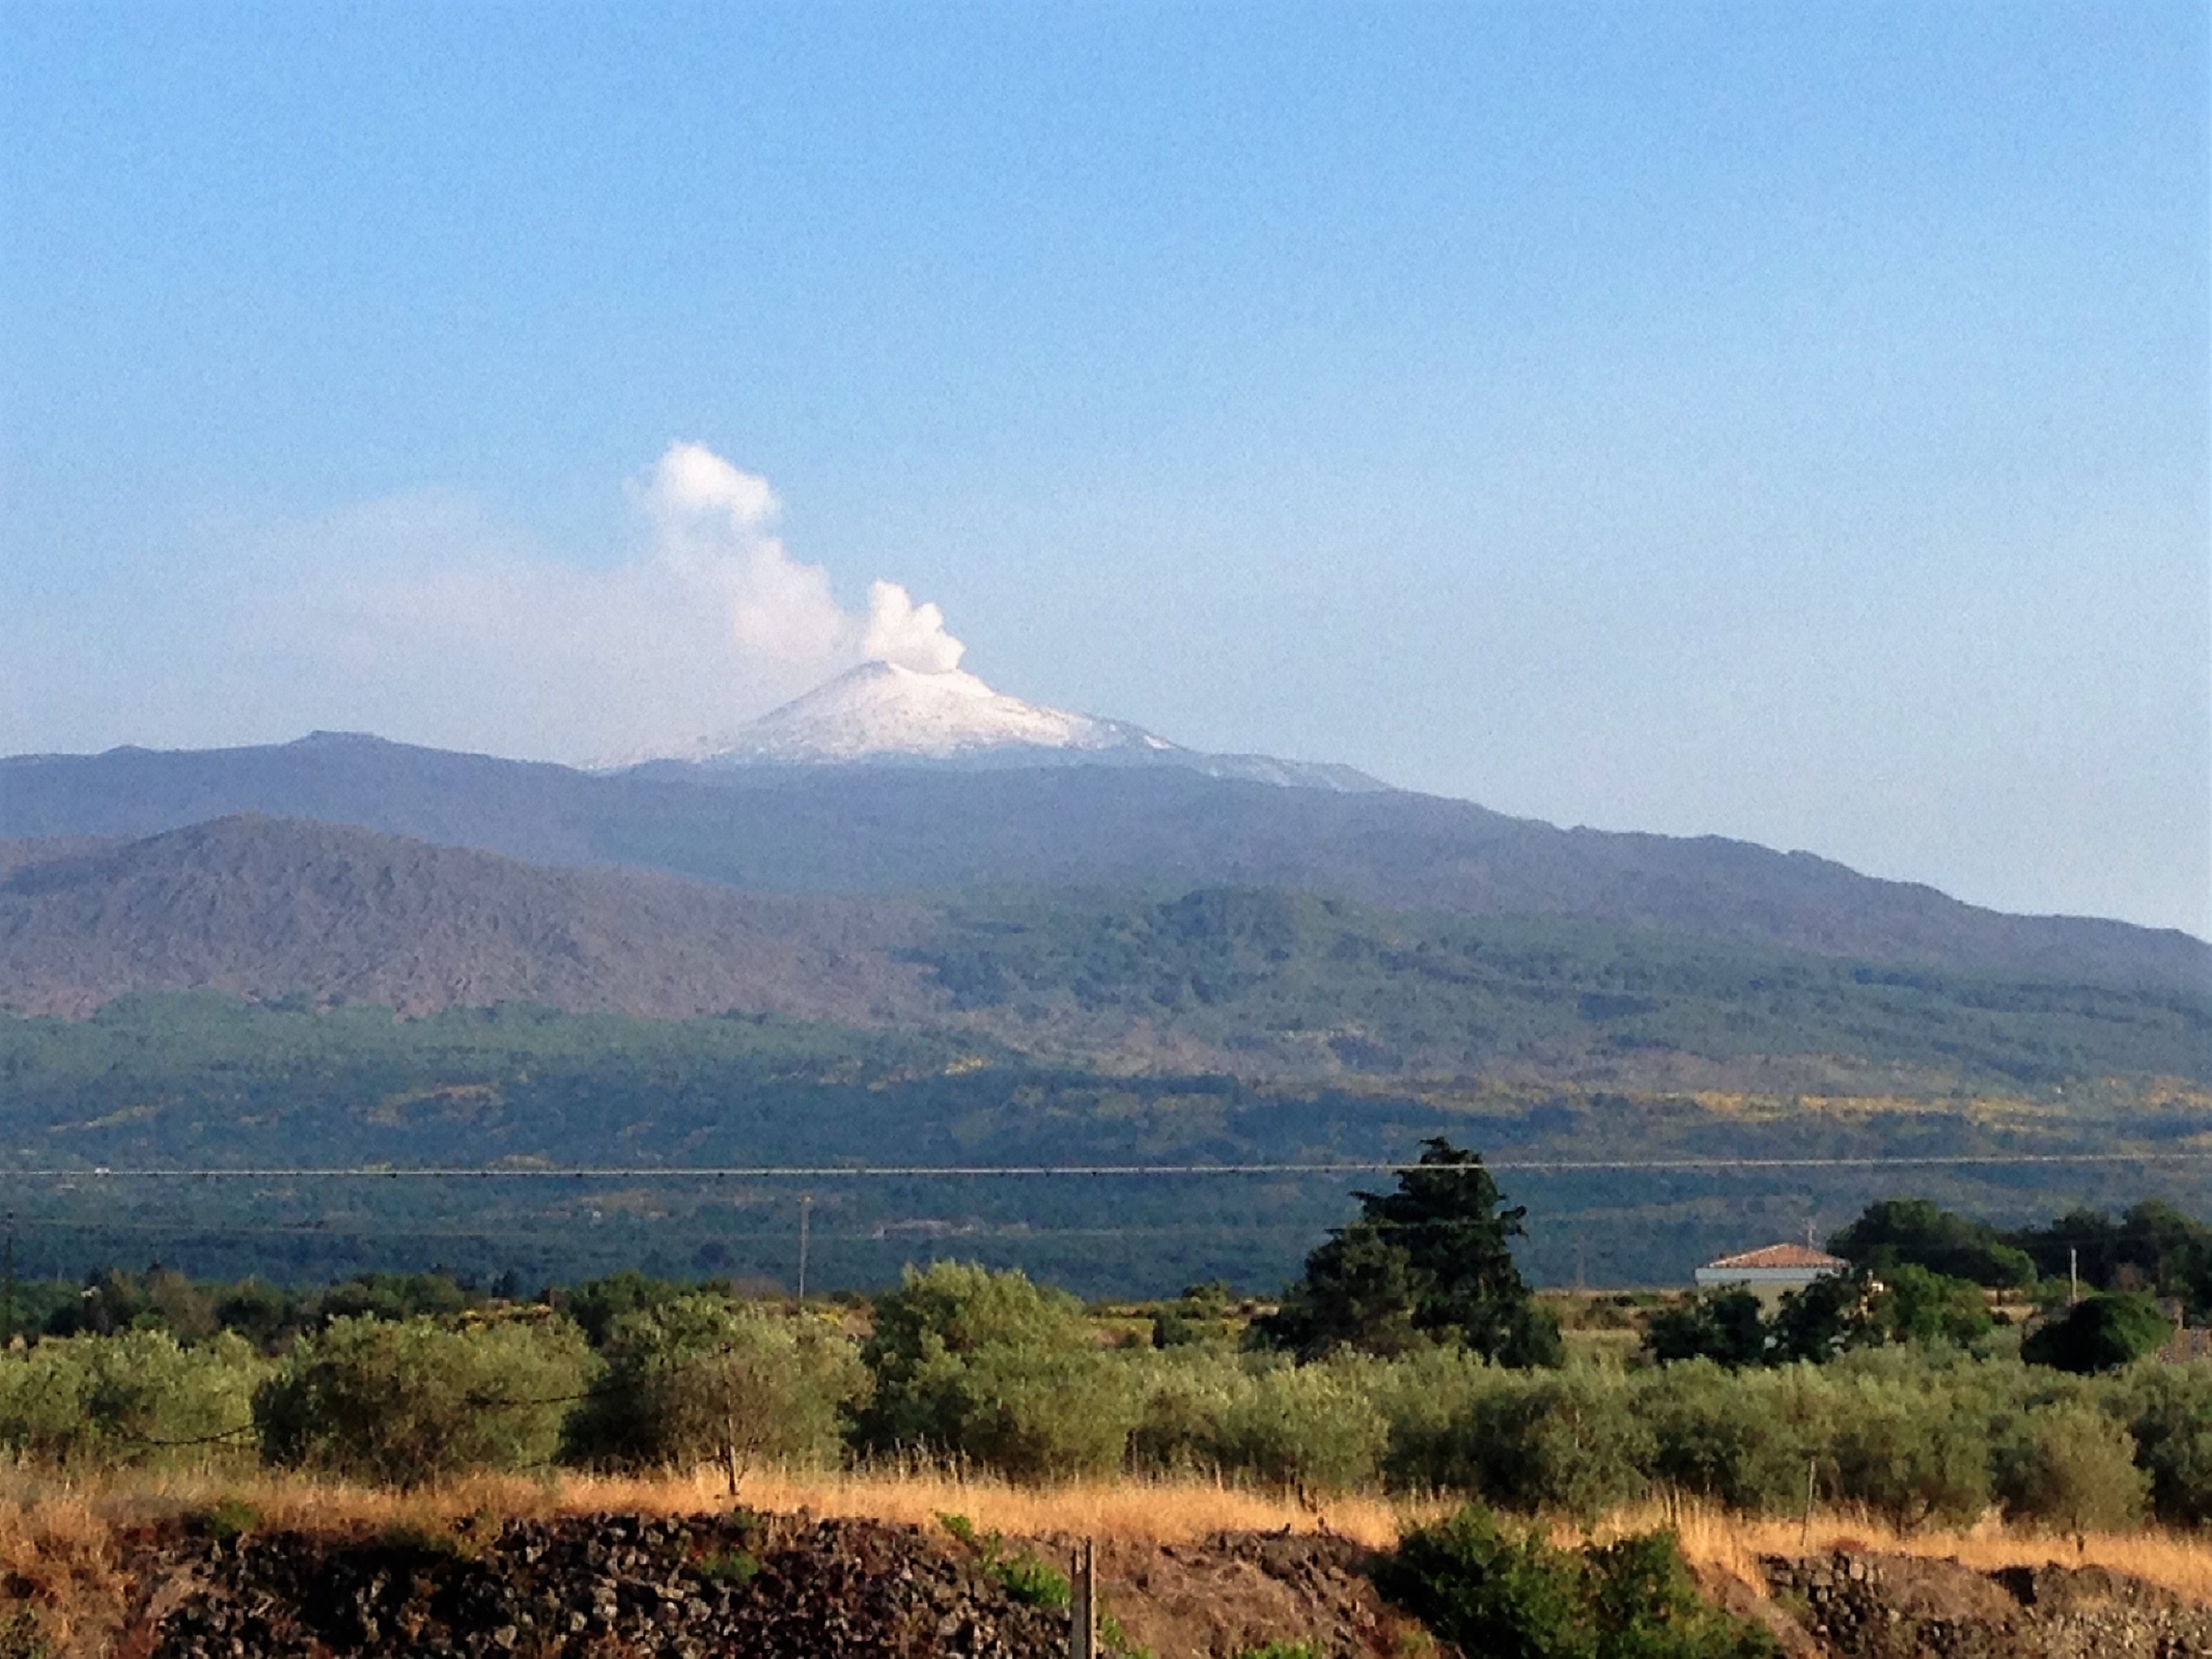 The other side of Mount Etna